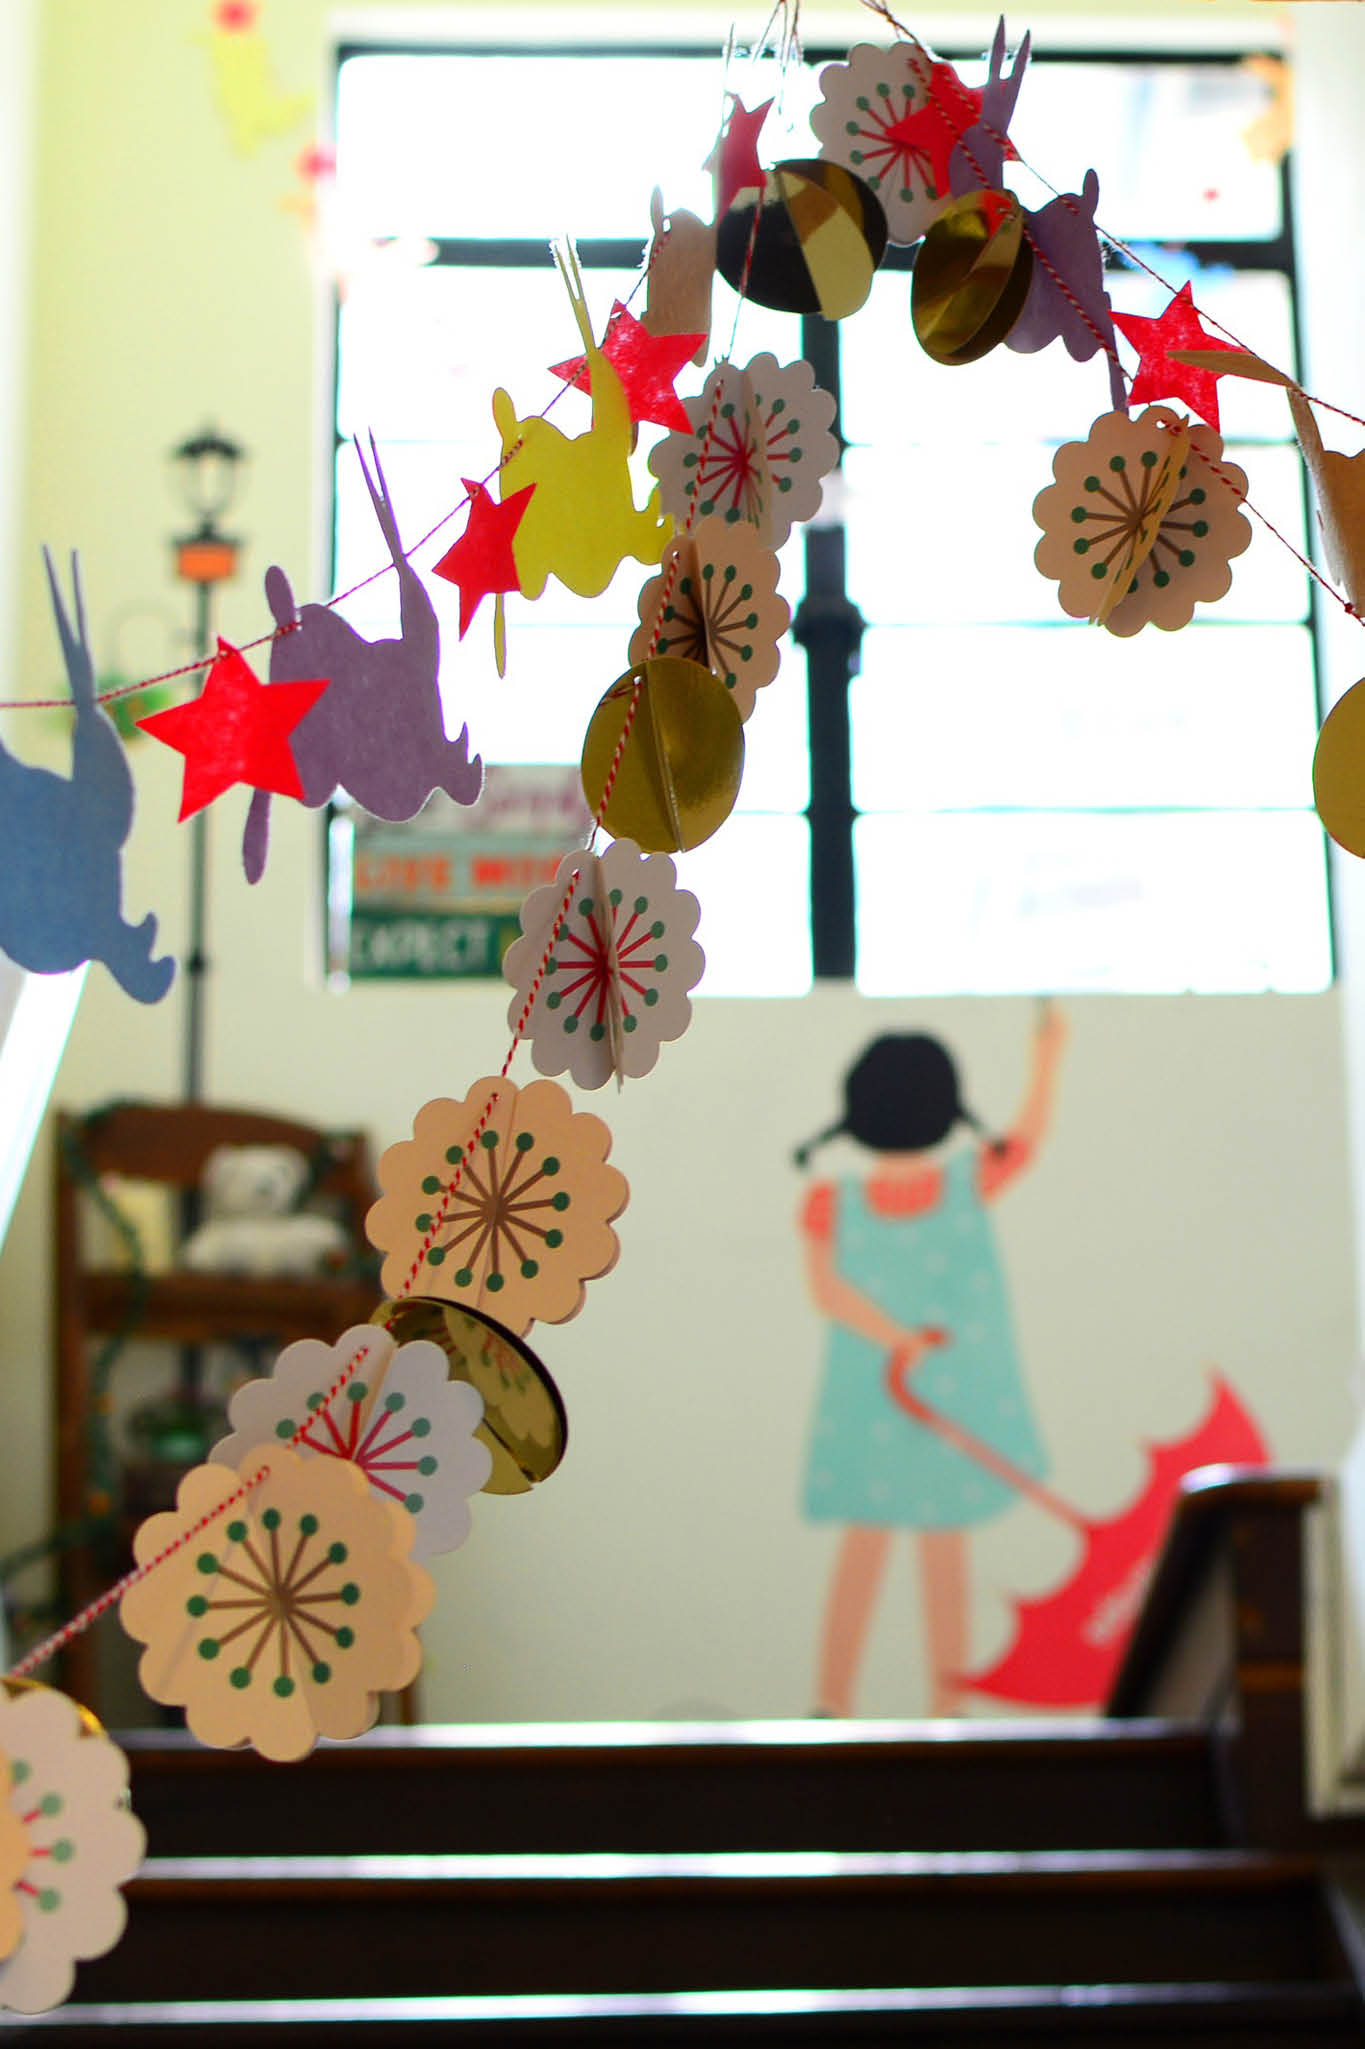 Children's artwork strung up and hanging from ceiling